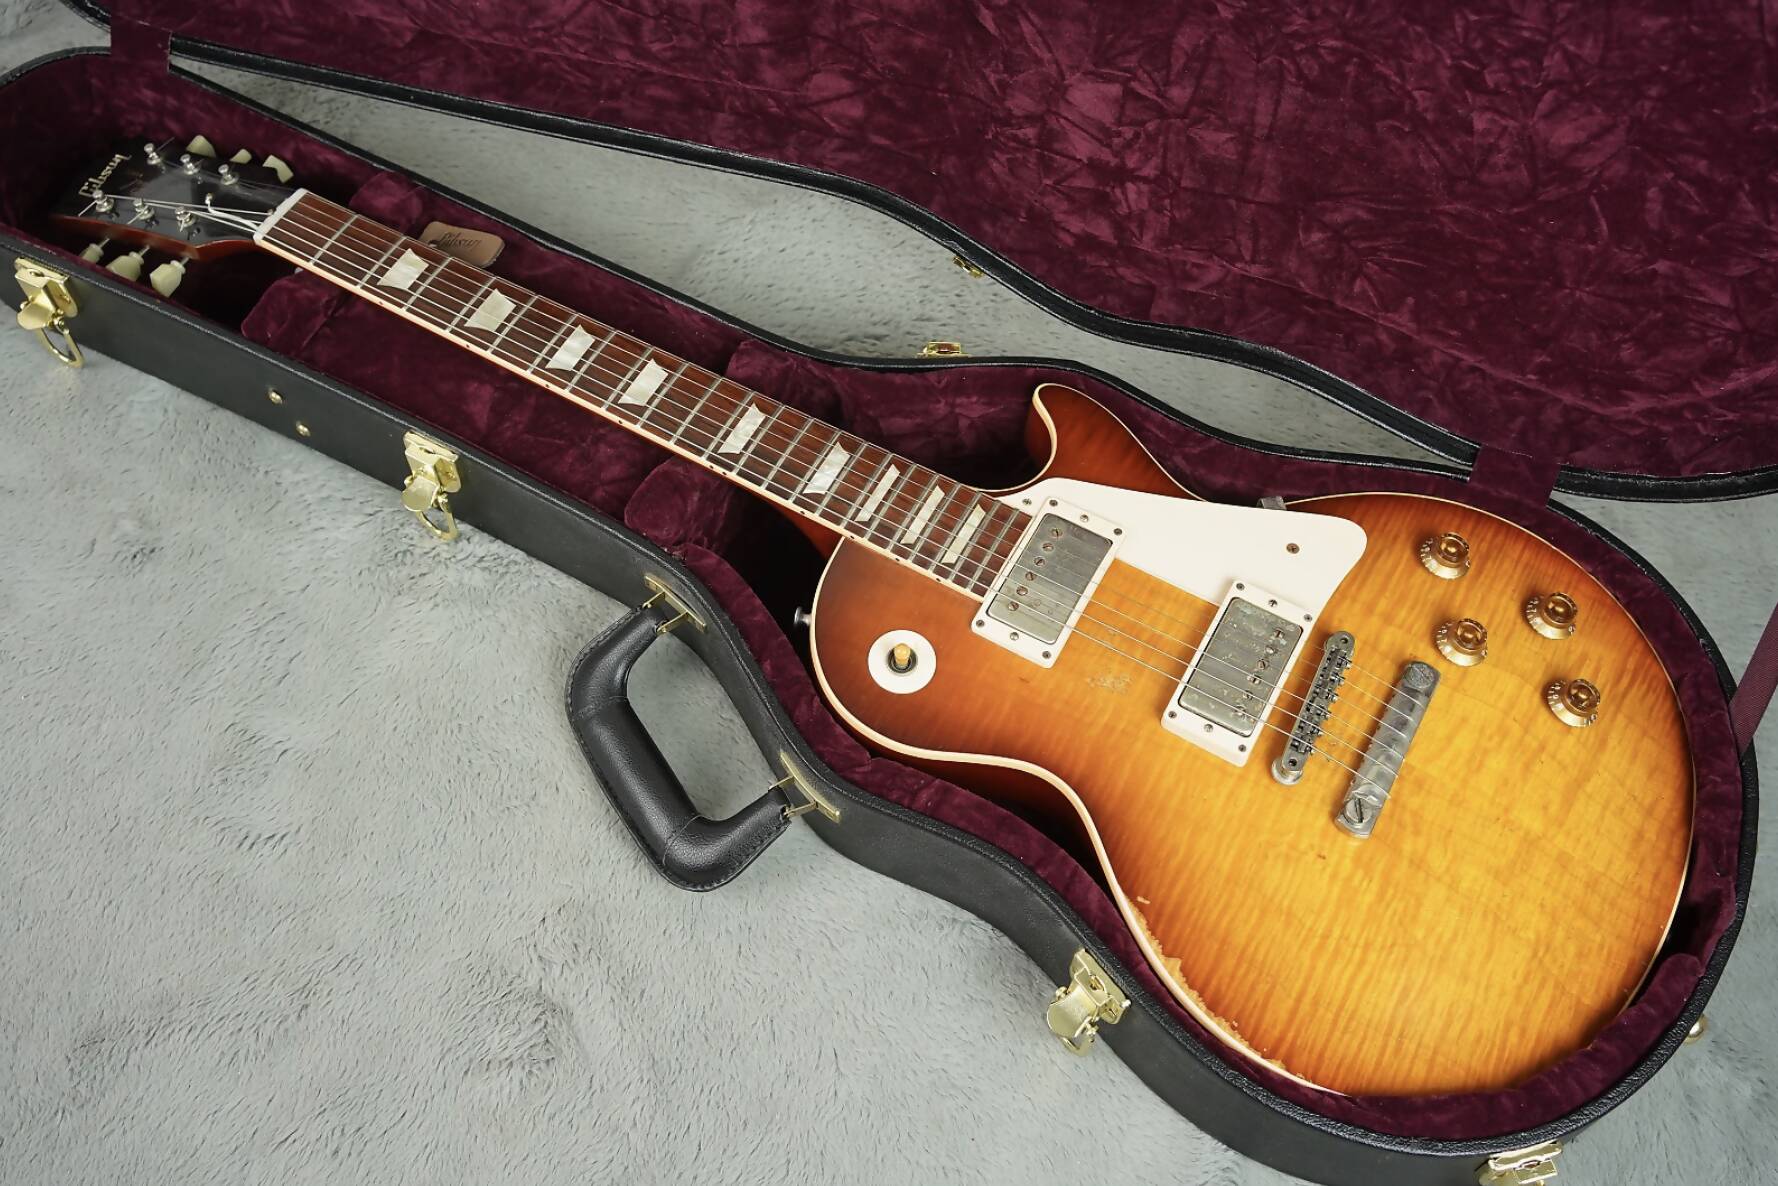 2009 Gibson Billy Gibbons "Pearly Gates" Les Paul Aged Original Sunburst + OHSC